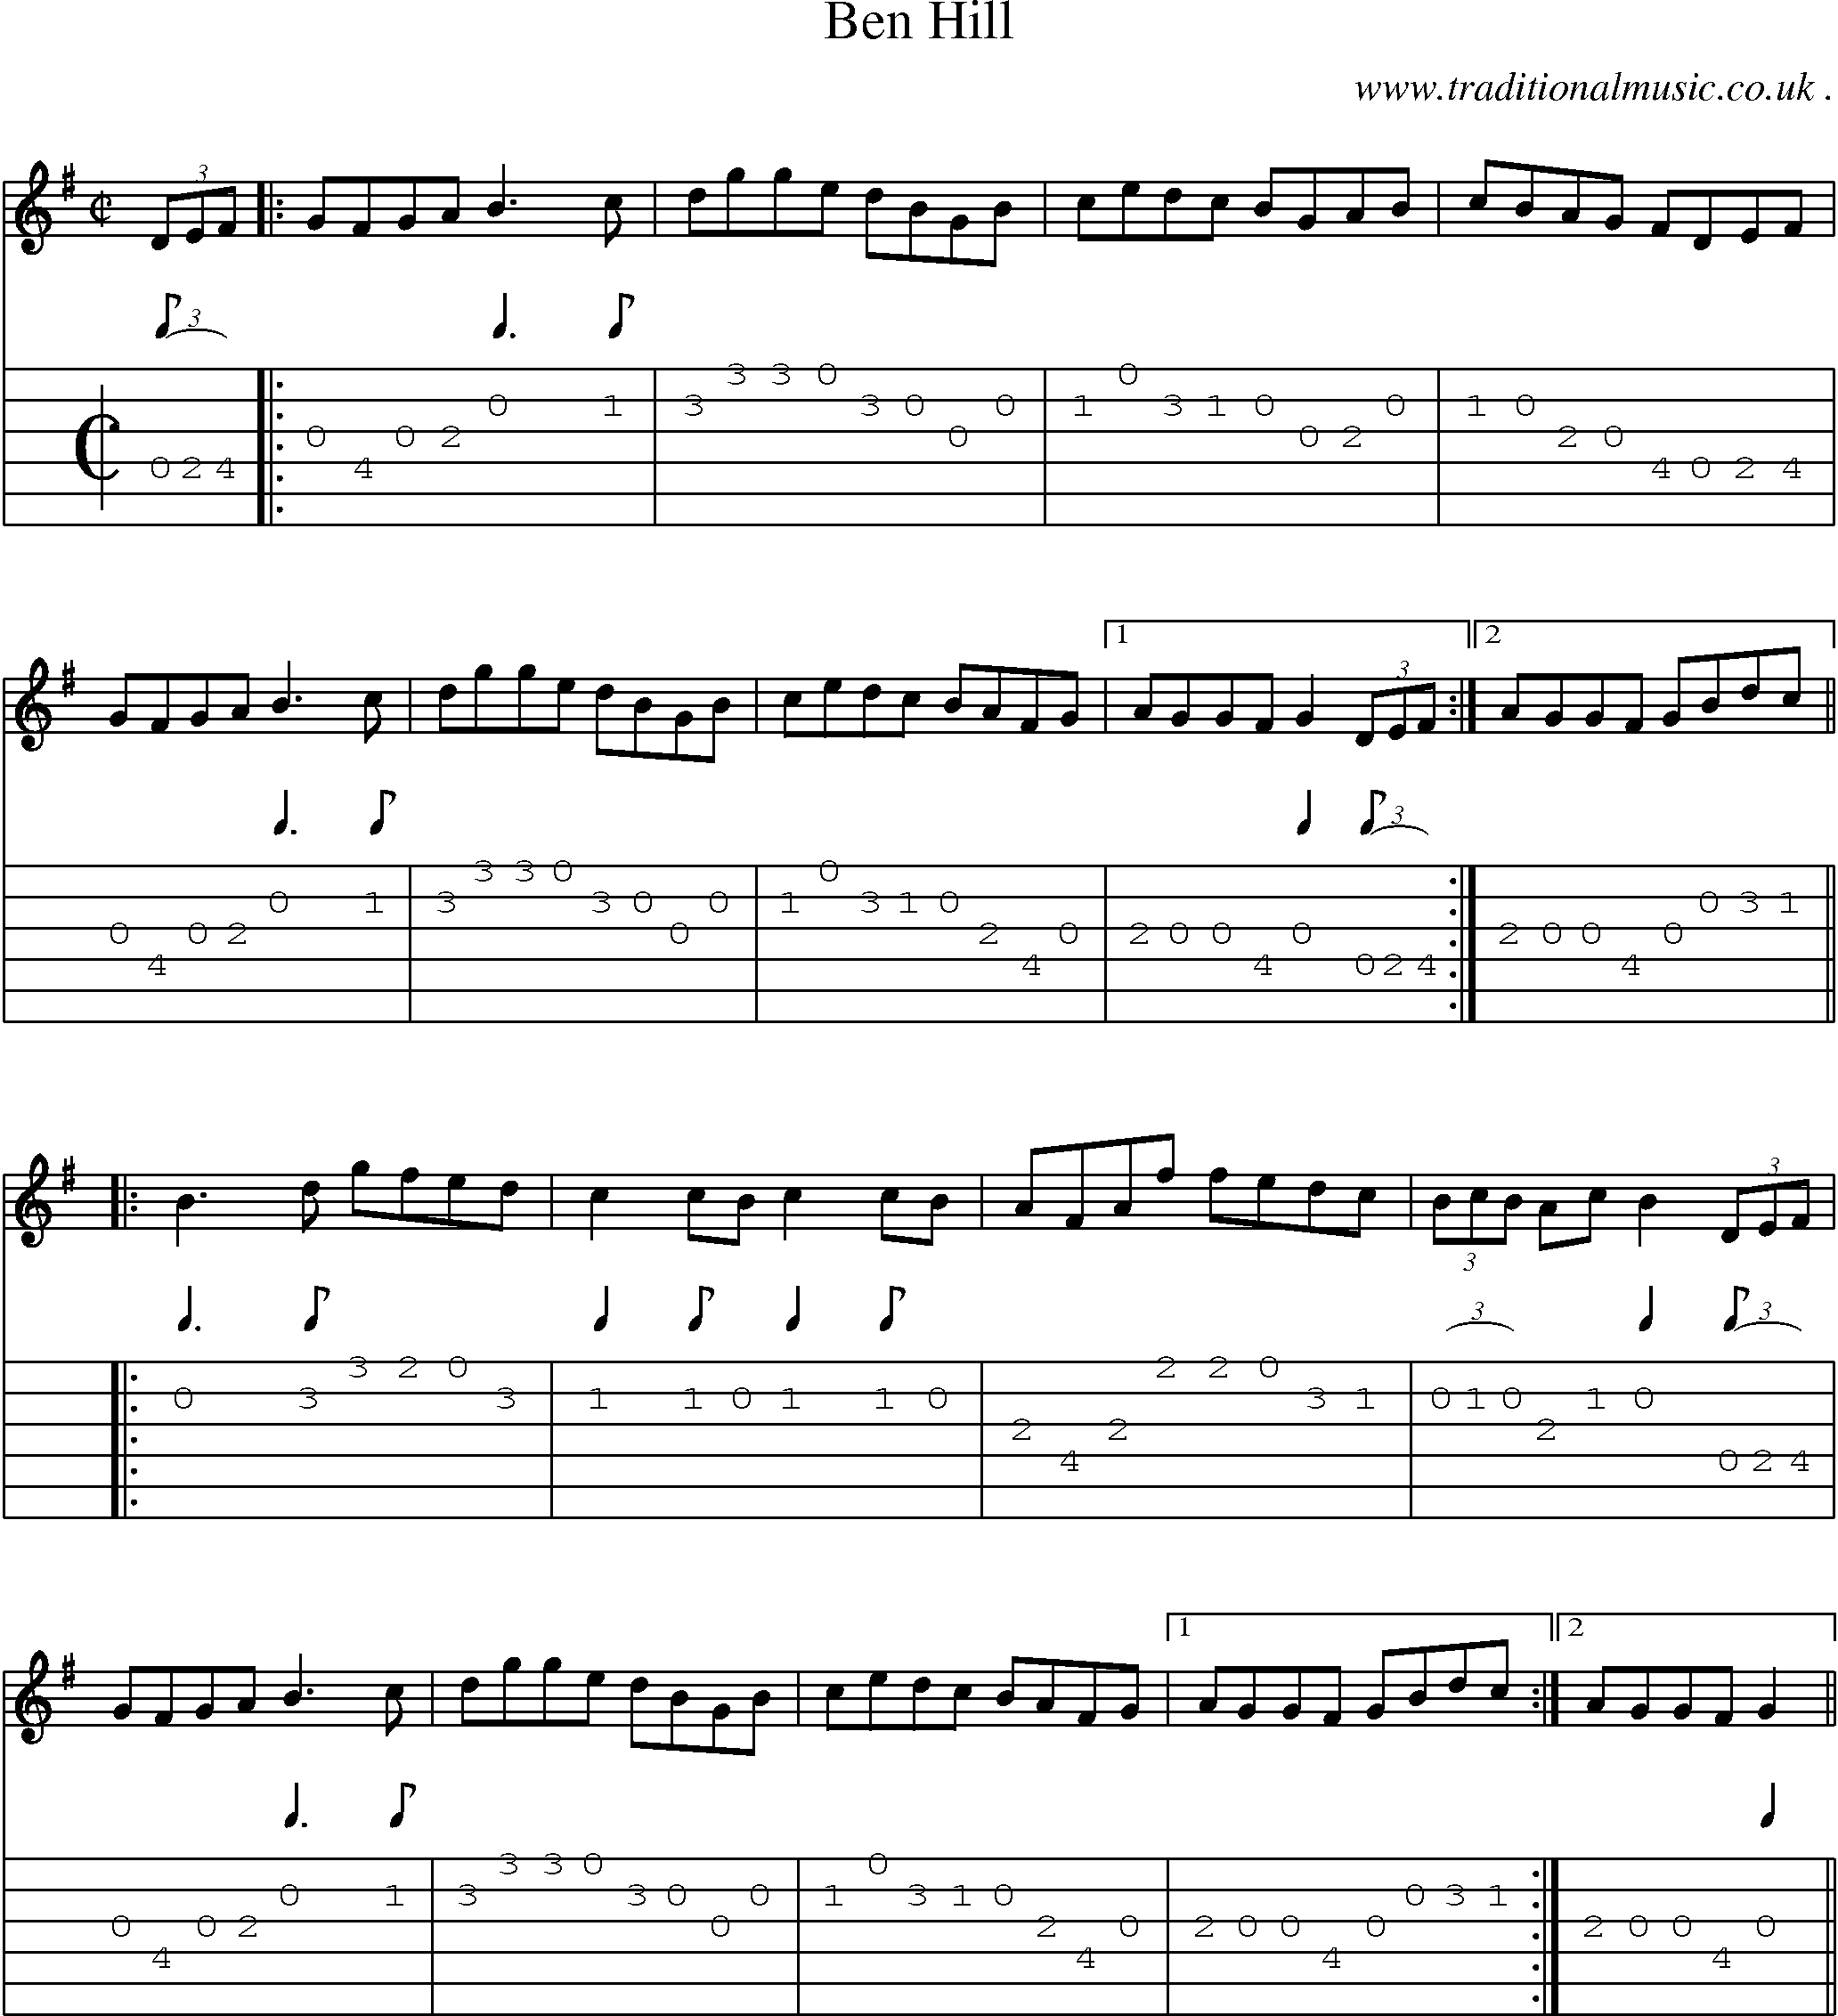 Sheet-Music and Guitar Tabs for Ben Hill